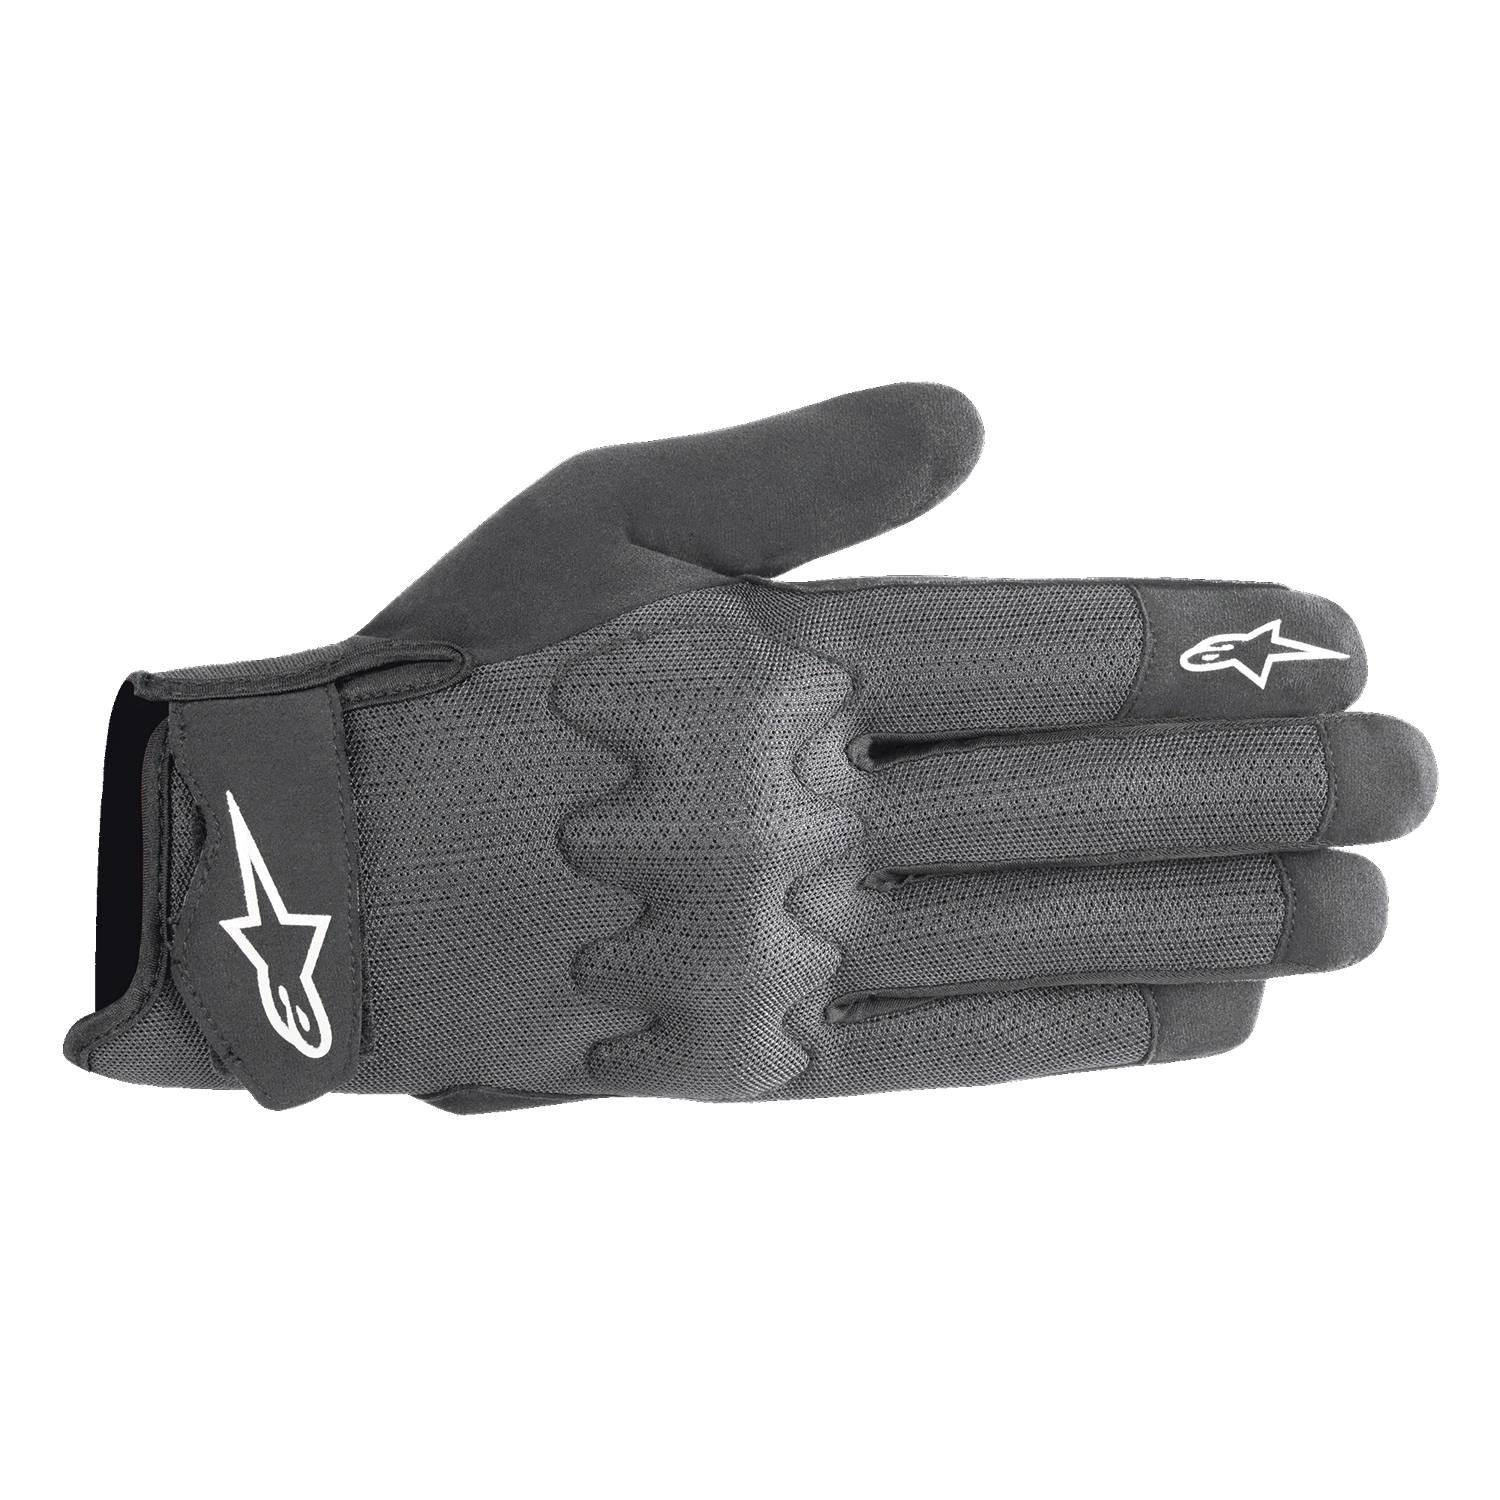 Image of Alpinestars Stated Air Gloves Black Silver Size L ID 8059347145242